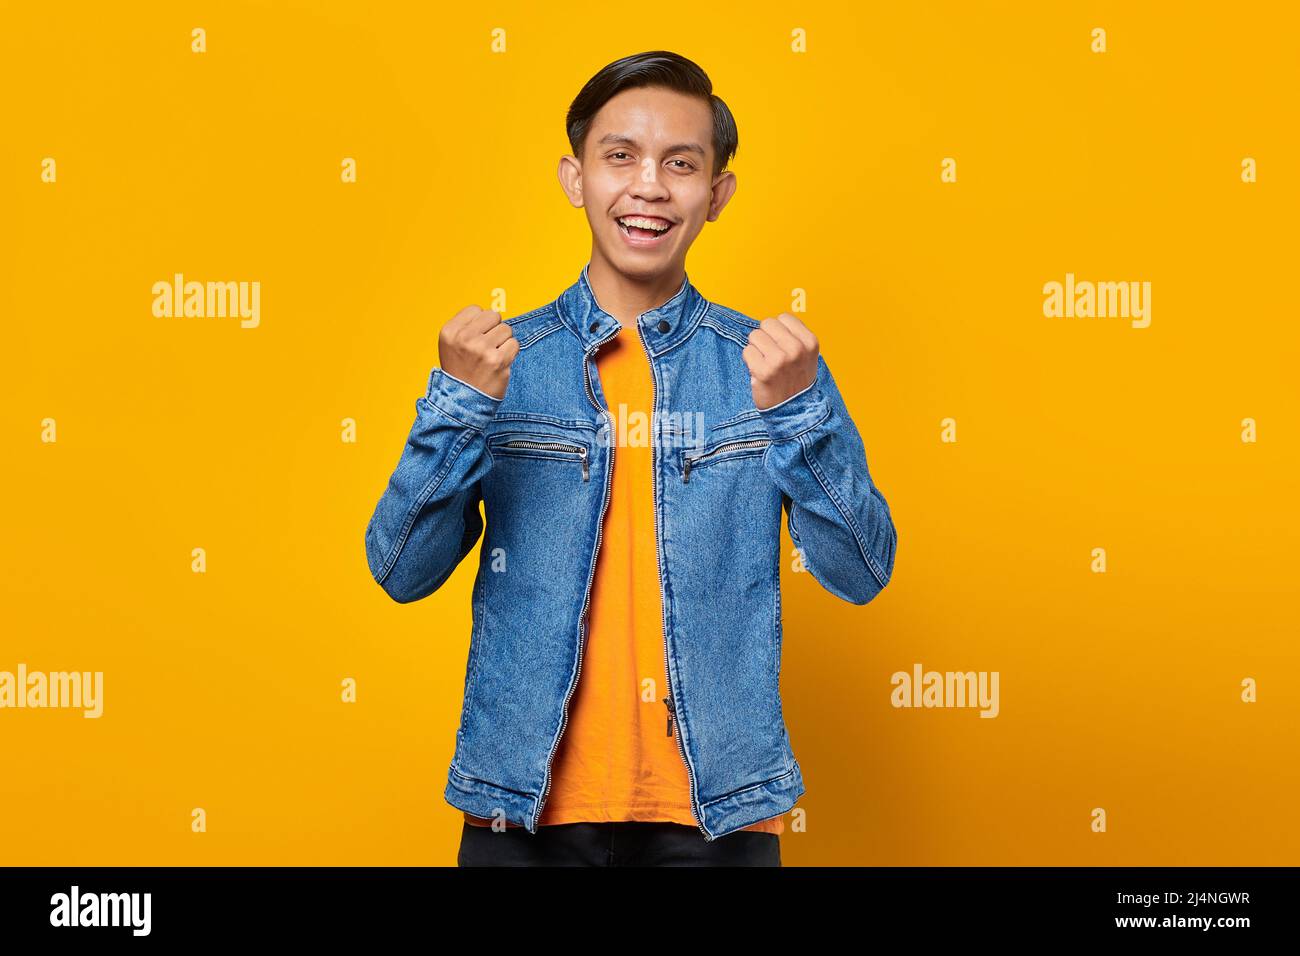 Portrait of excited young Asian man celebrating success with raised hands isolated on yellow background Stock Photo